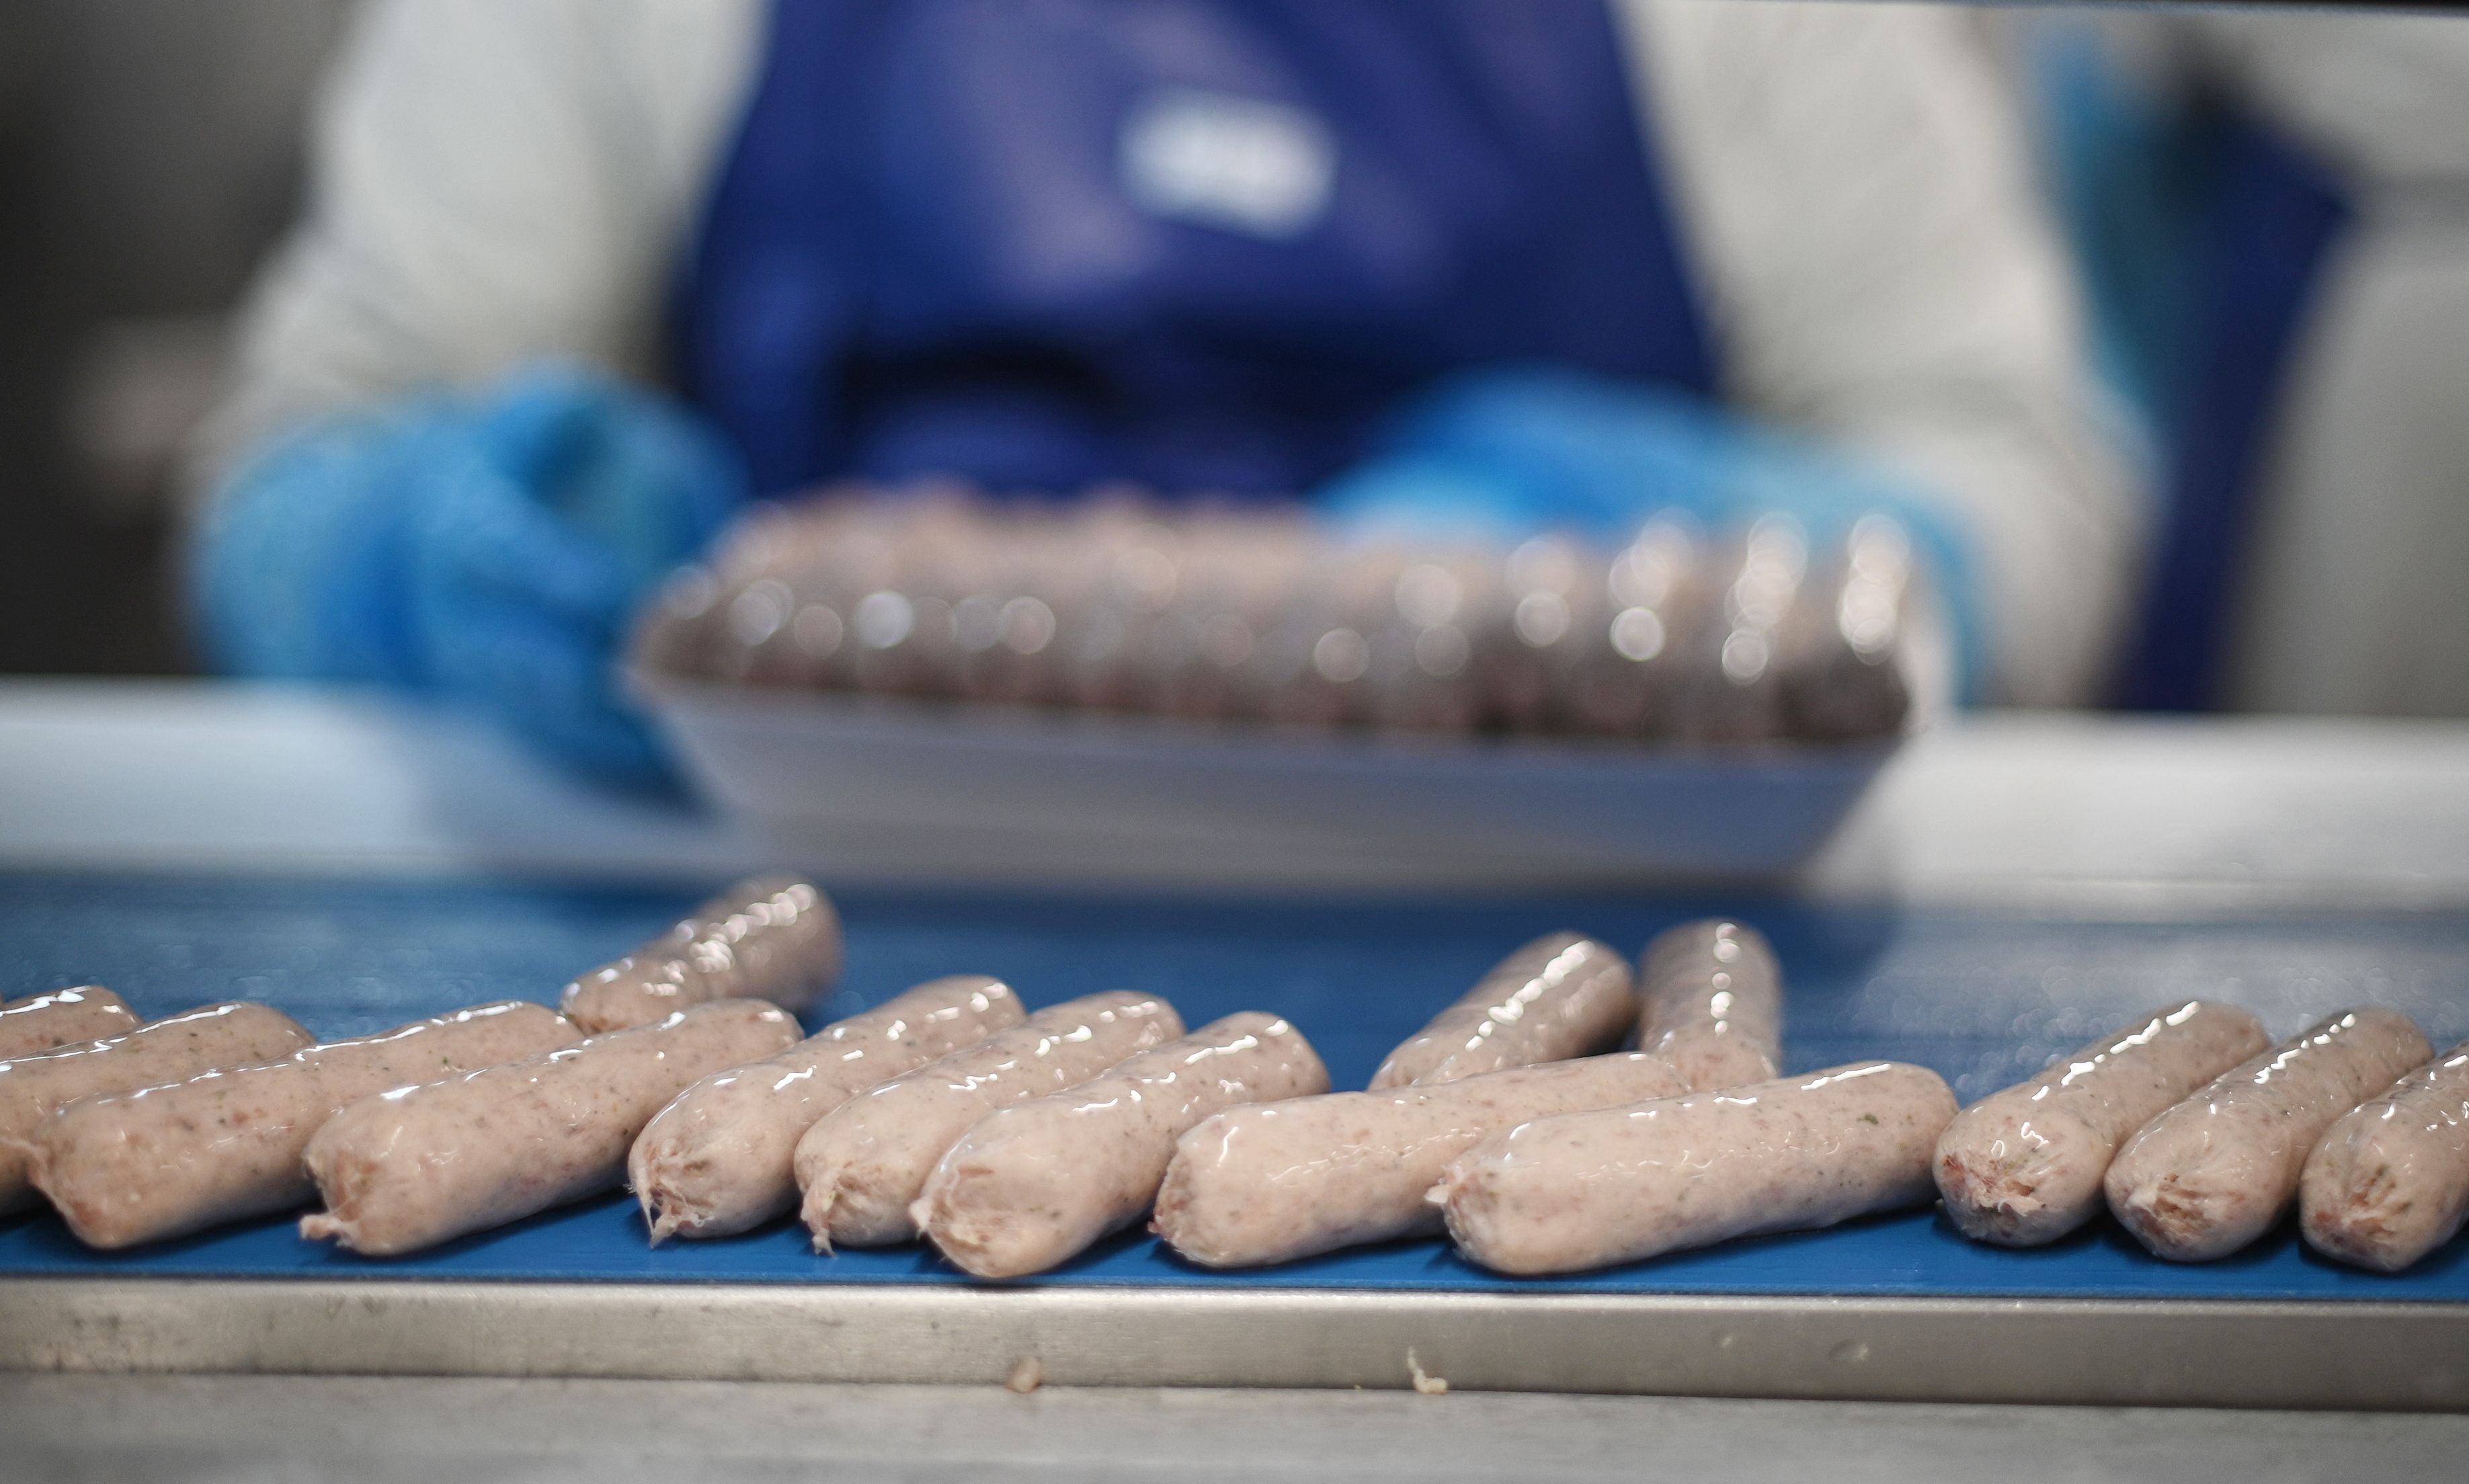 Like laws, they say you should never see how sausages are made